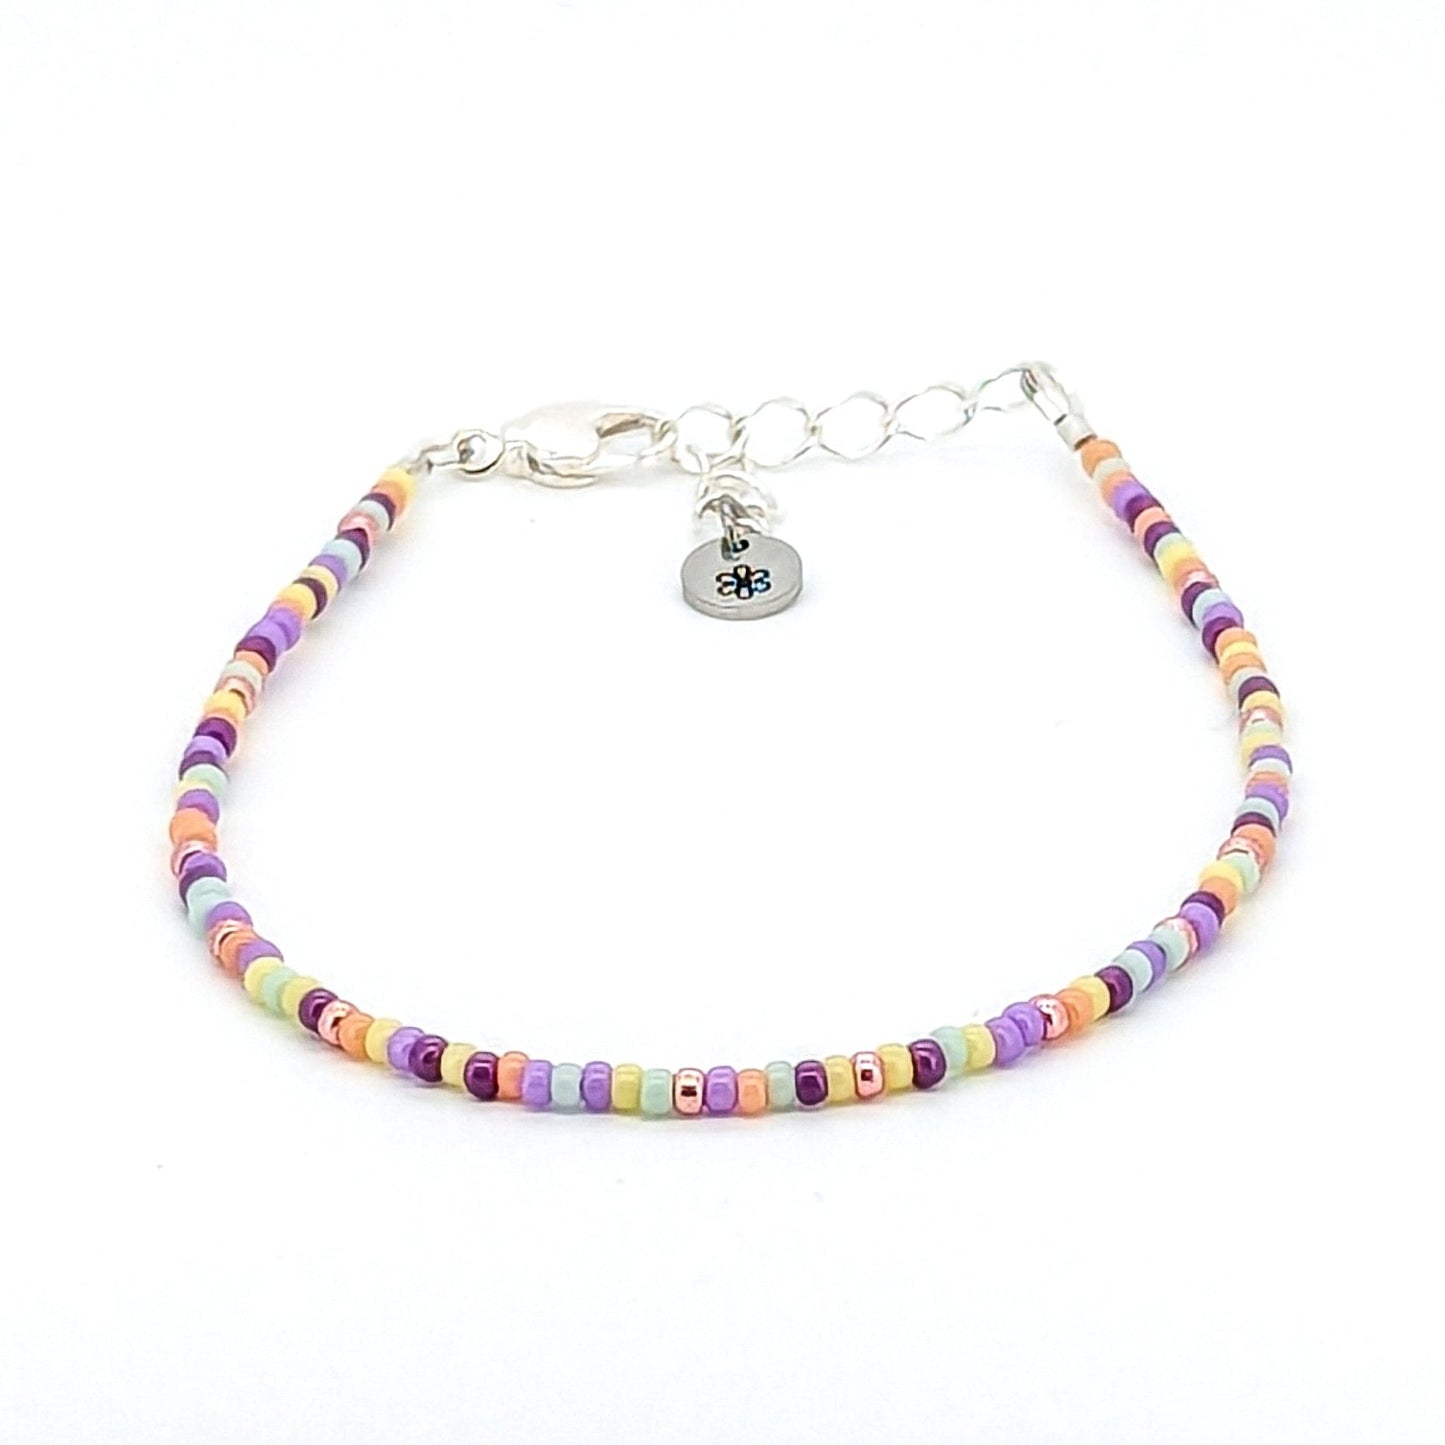 Dainty bracelet - Purple, peach, pale blue and pale yellow glass seed beads - creations by cherie